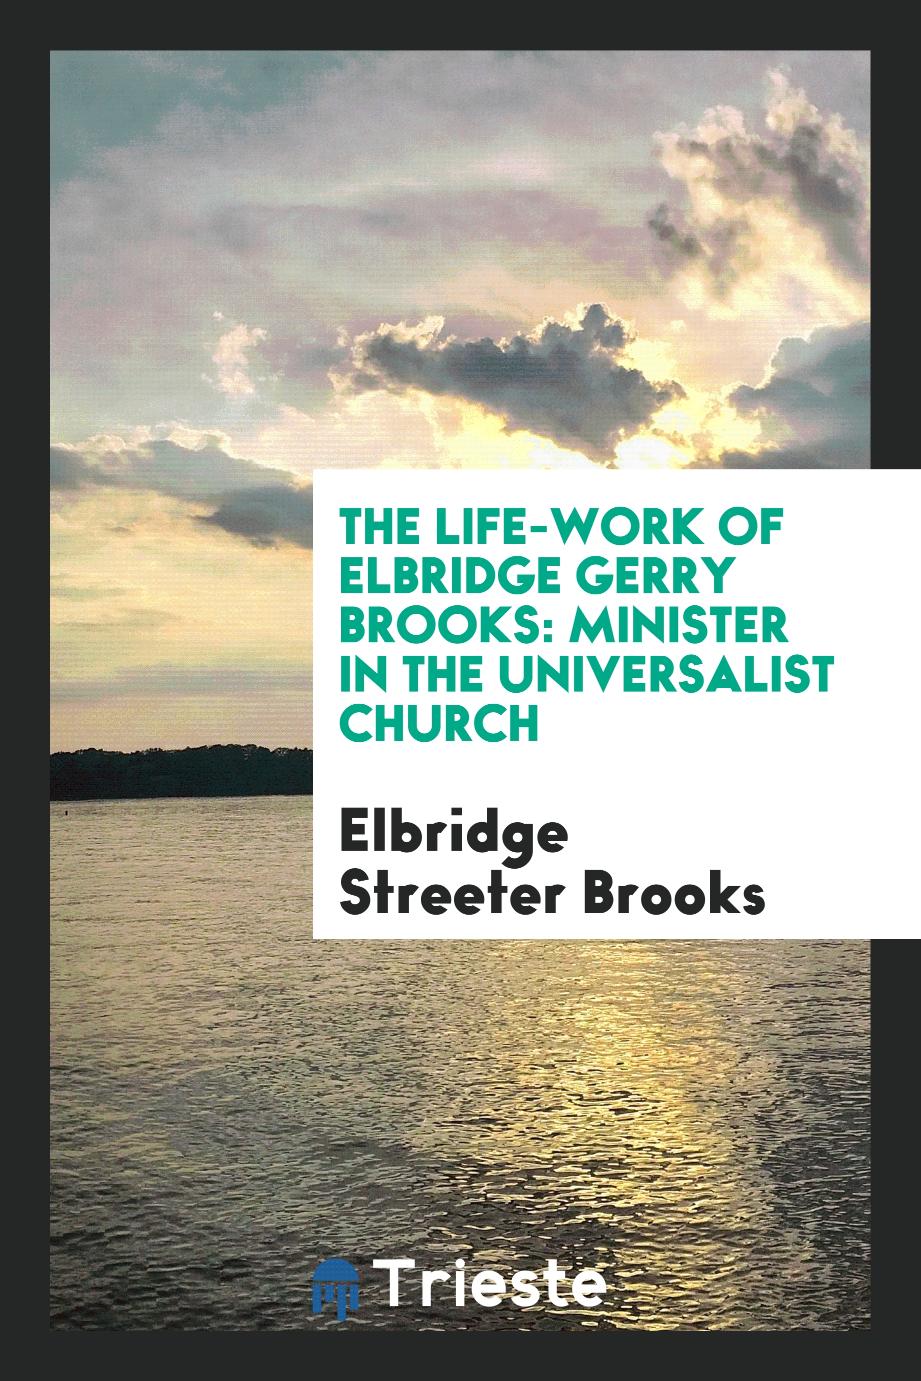 The Life-work of Elbridge Gerry Brooks: Minister in the Universalist Church